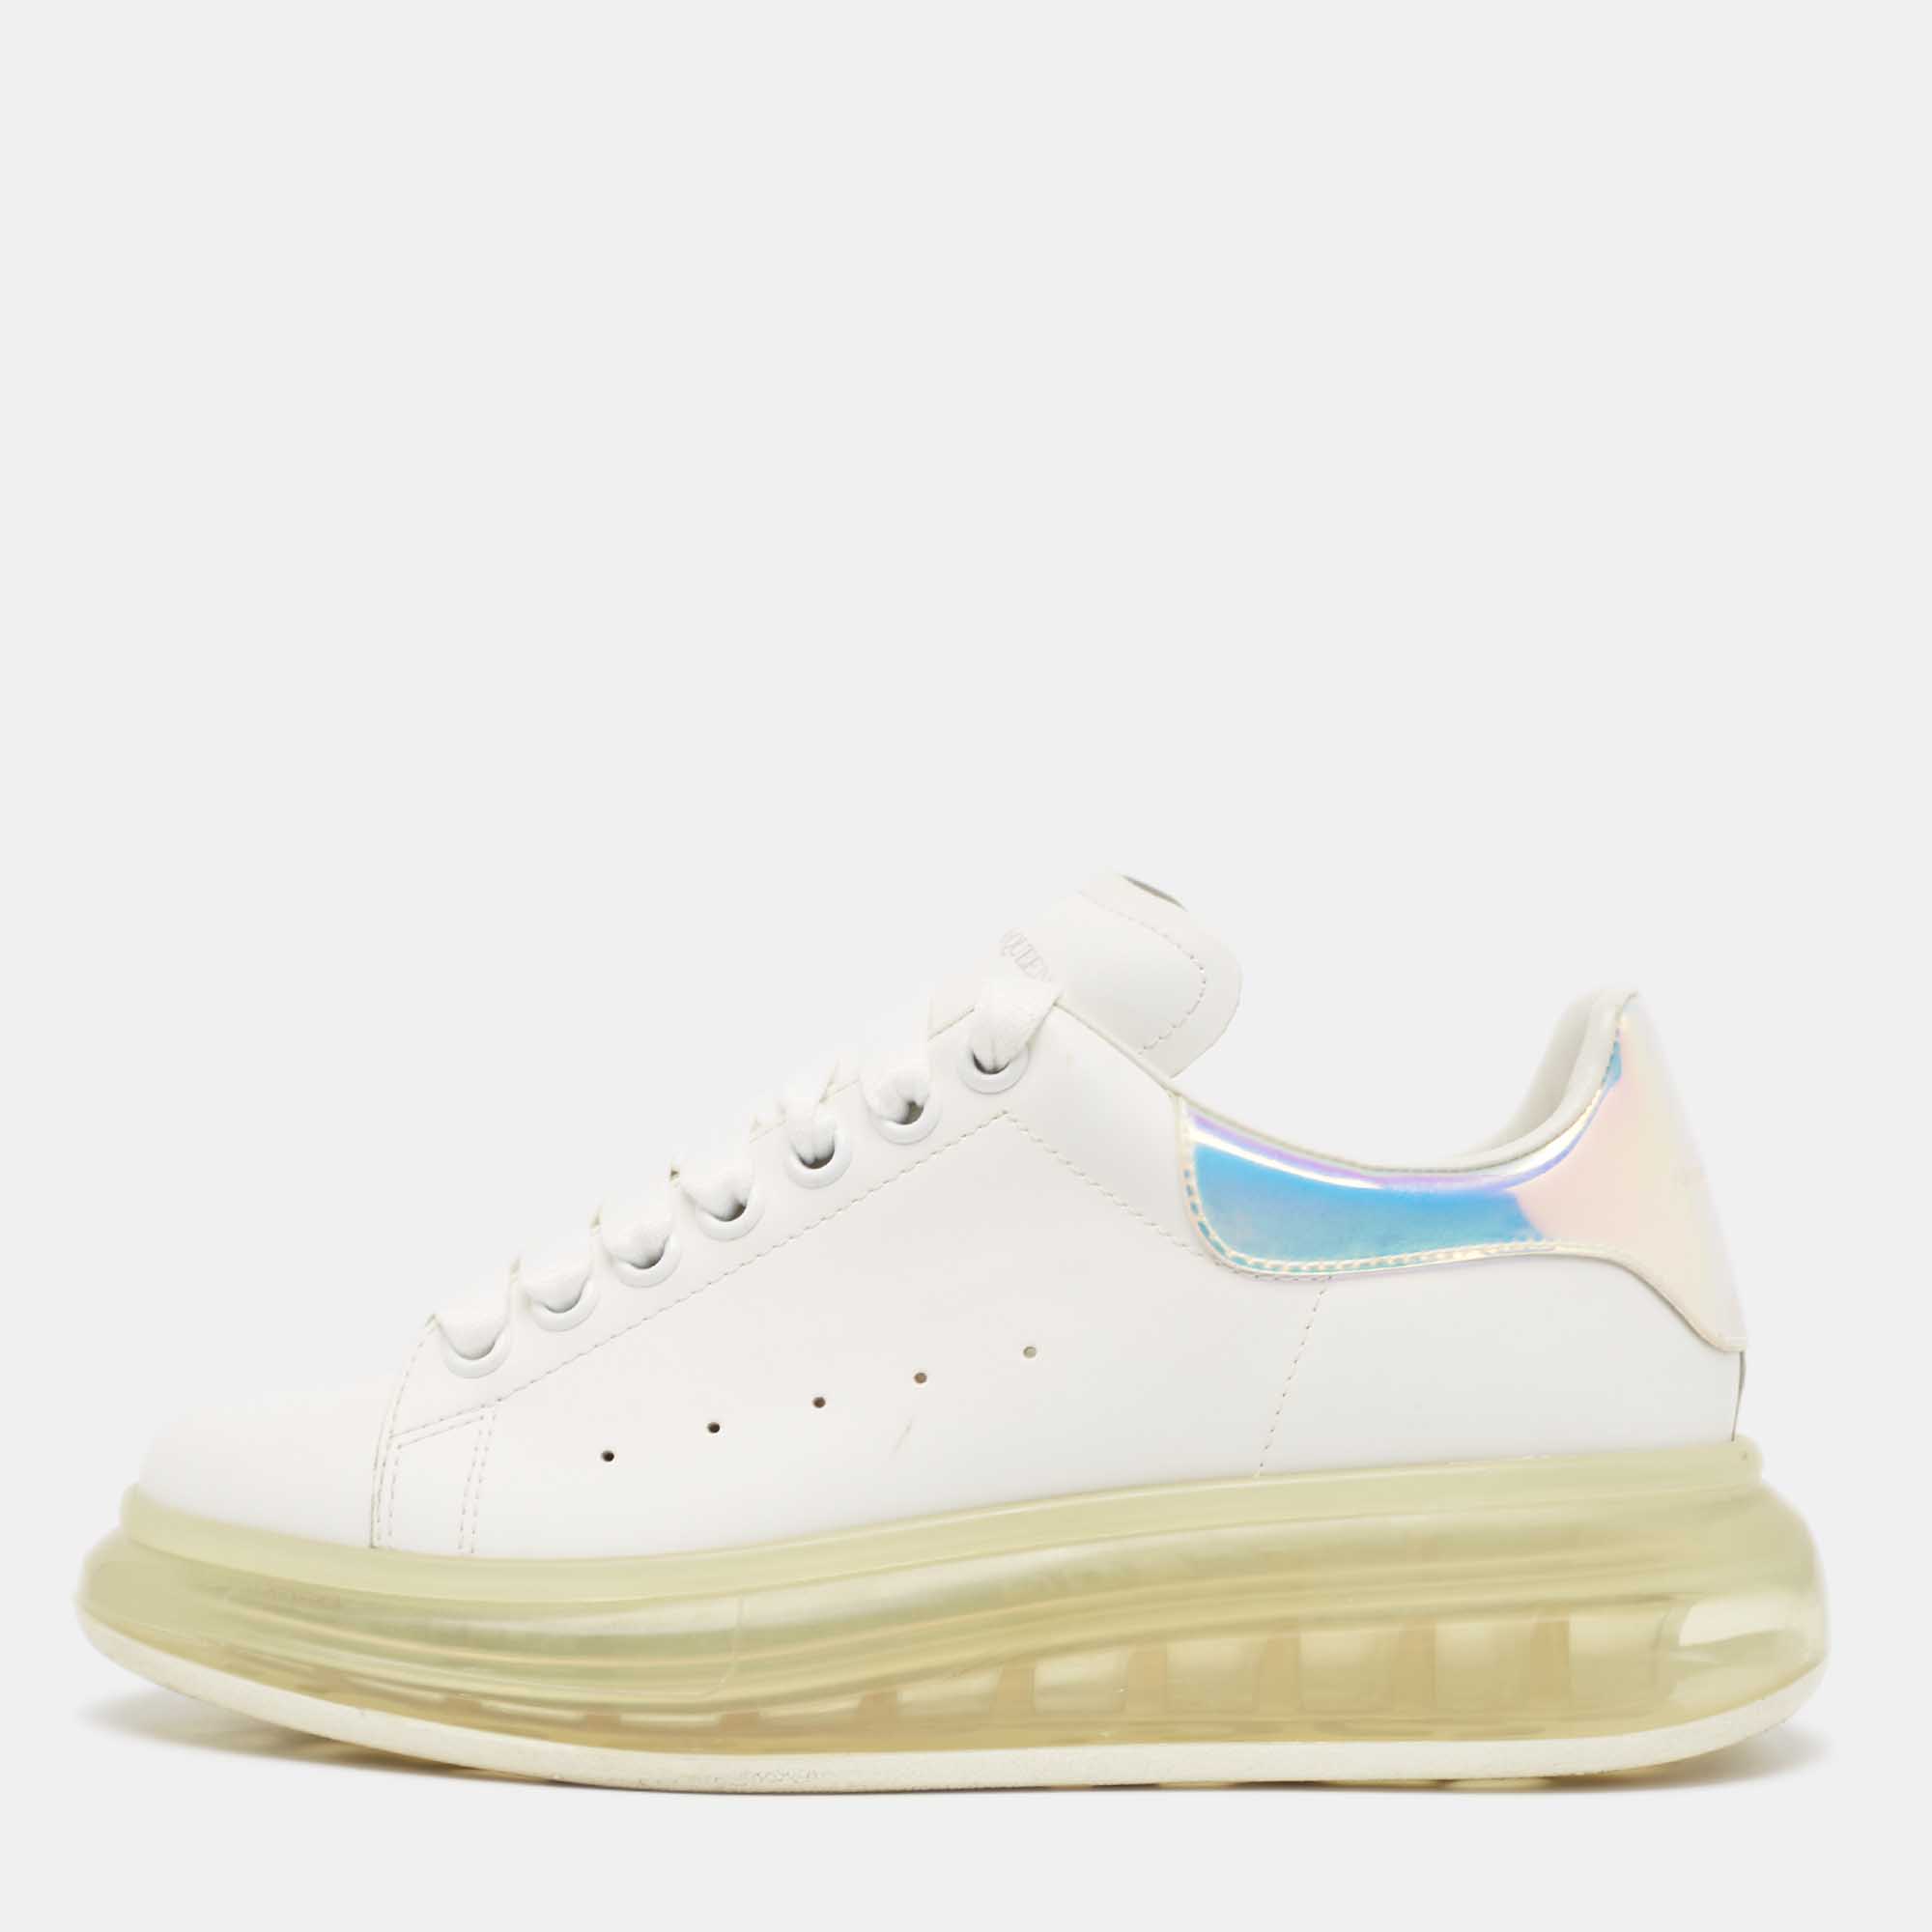 

Alexander McQueen White/ Iridescent Leather Oversized Sneakers Size